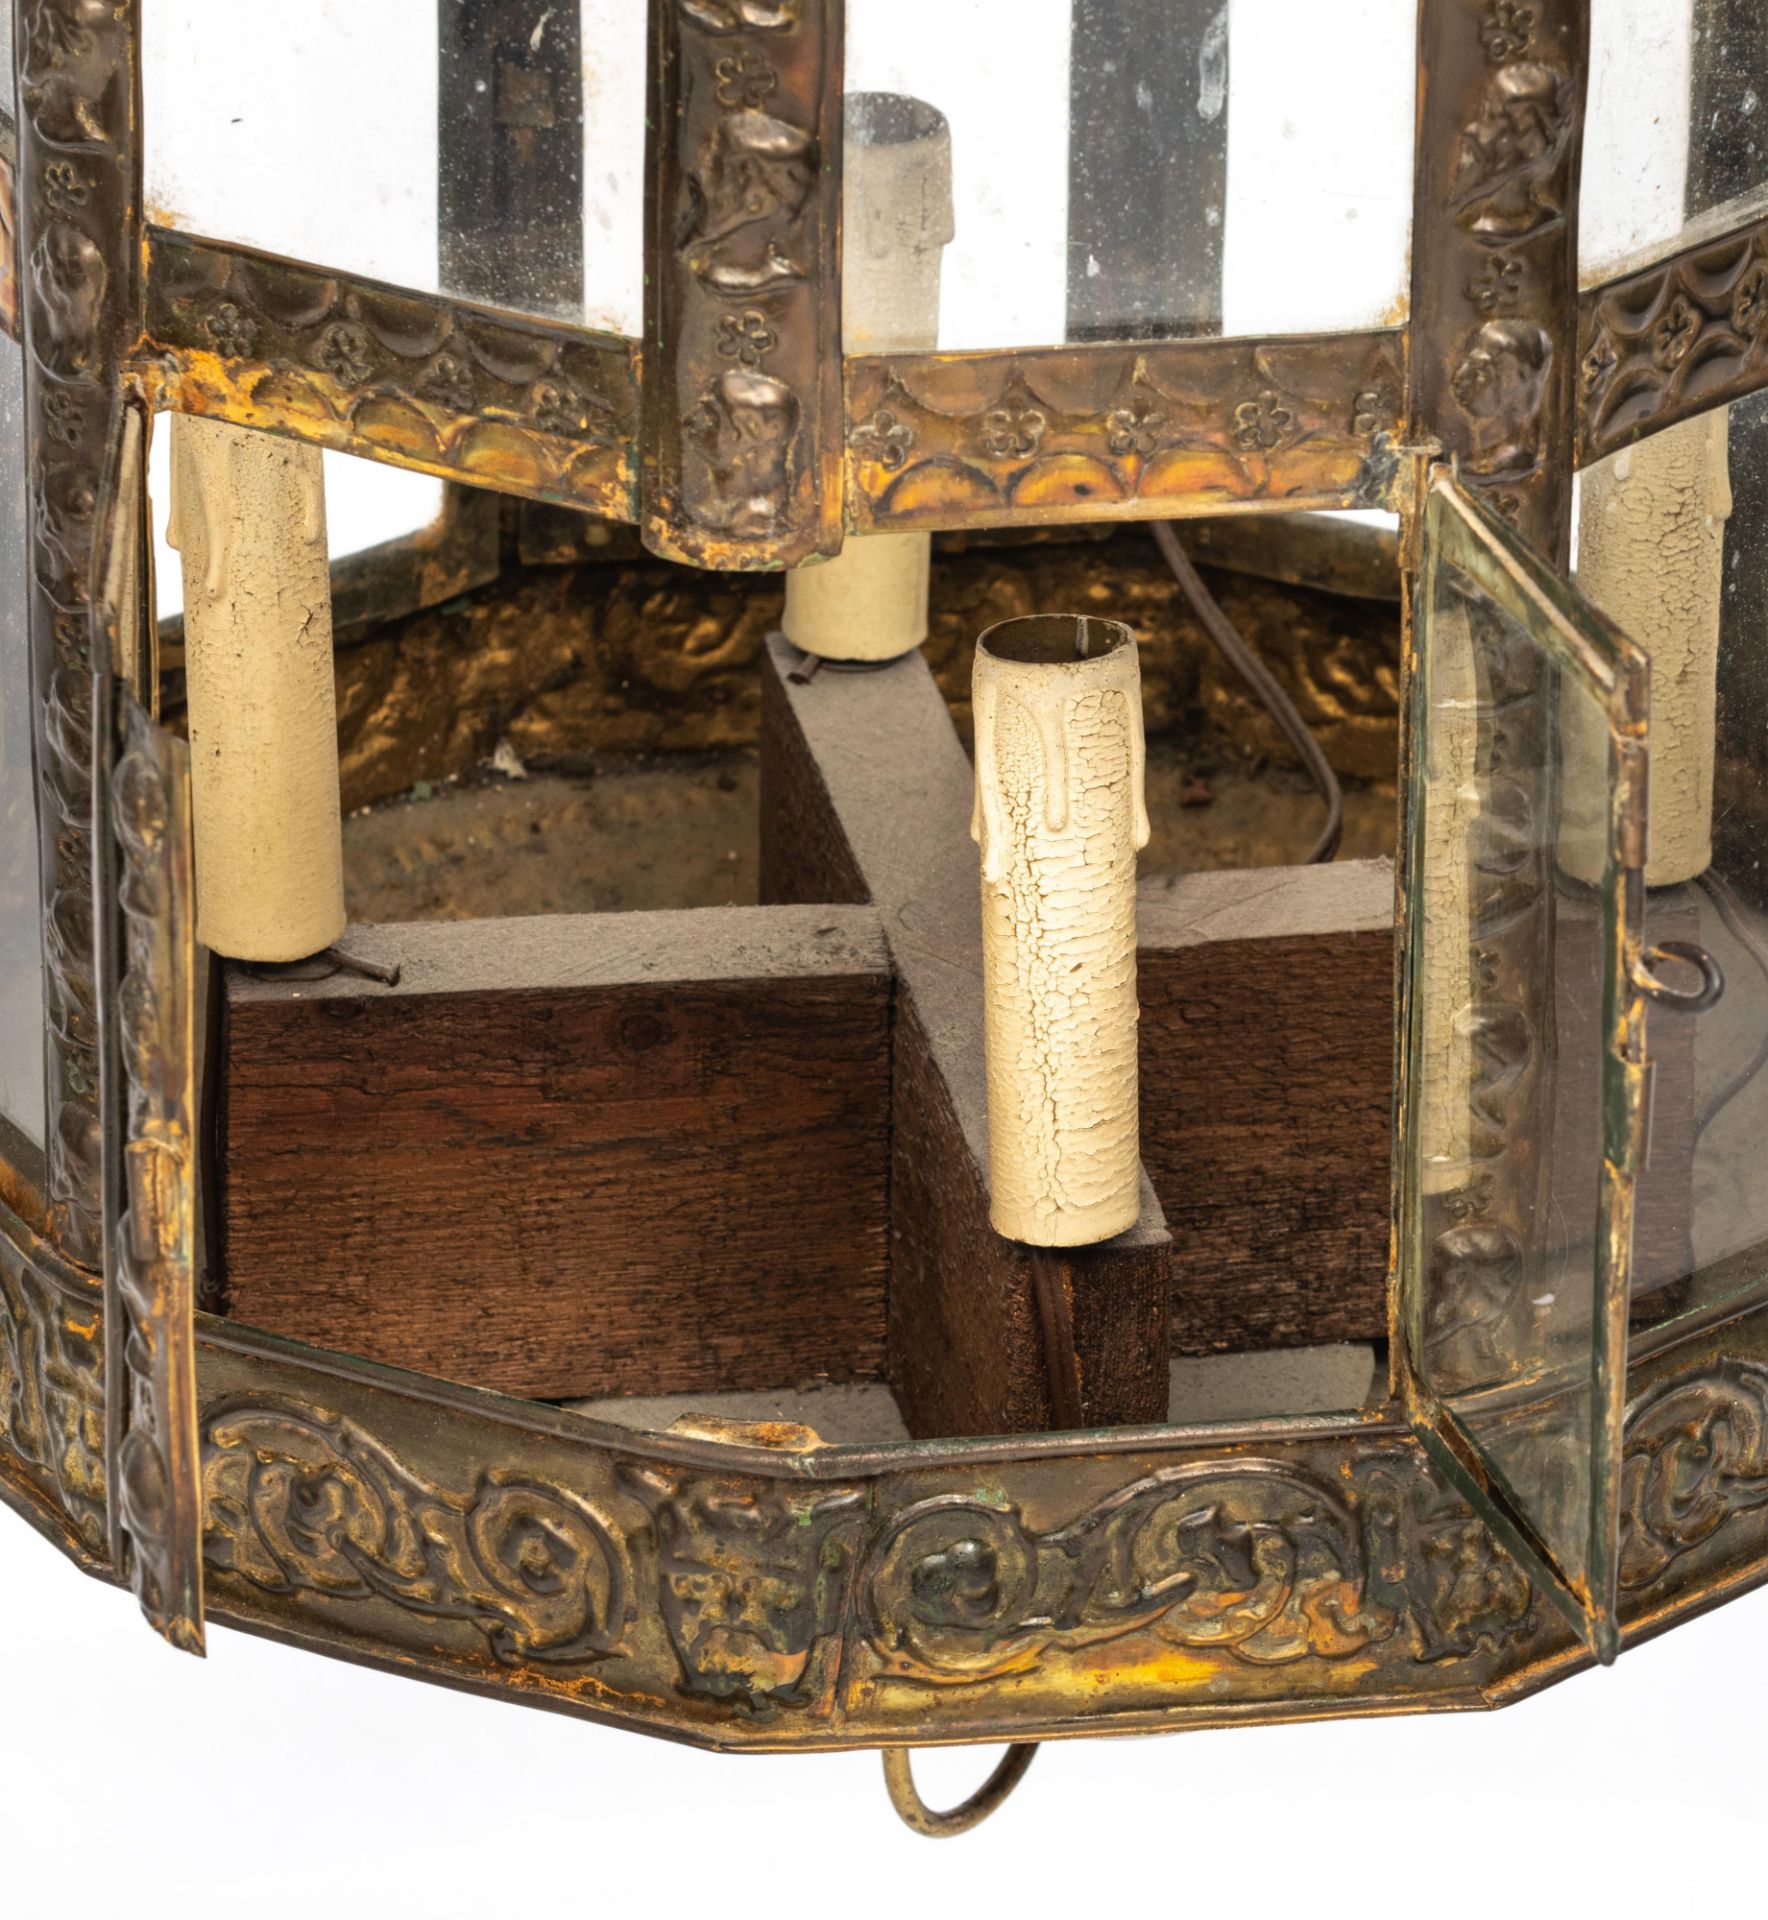 A Low-Countries brass lantern in a 17thC manner (possibly of the period or 19thC), H all-in 88 cm, , - Bild 5 aus 9